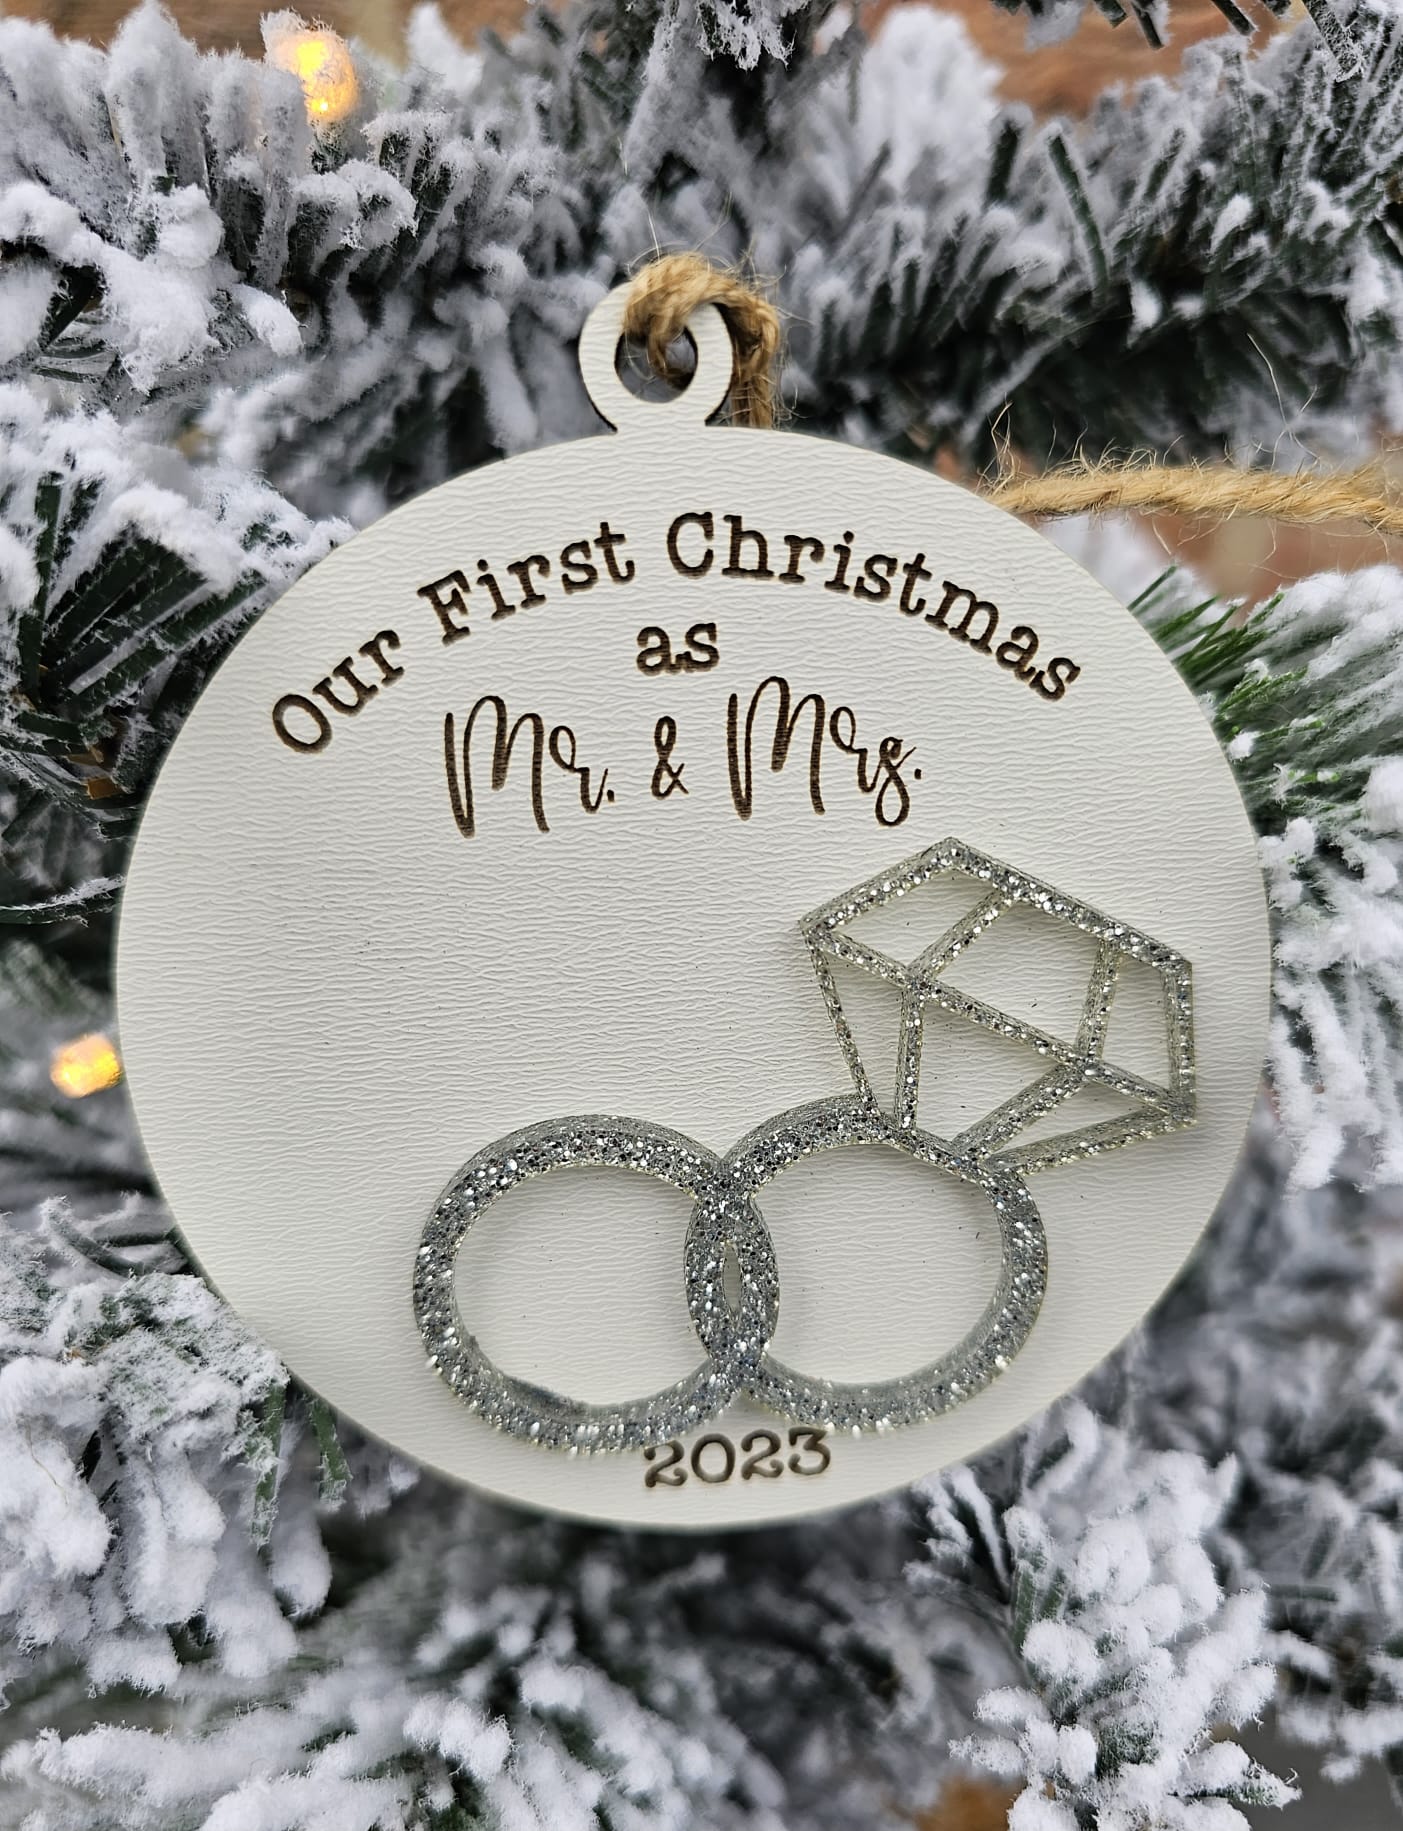 Our First Christmas as Mr & Mrs ornament